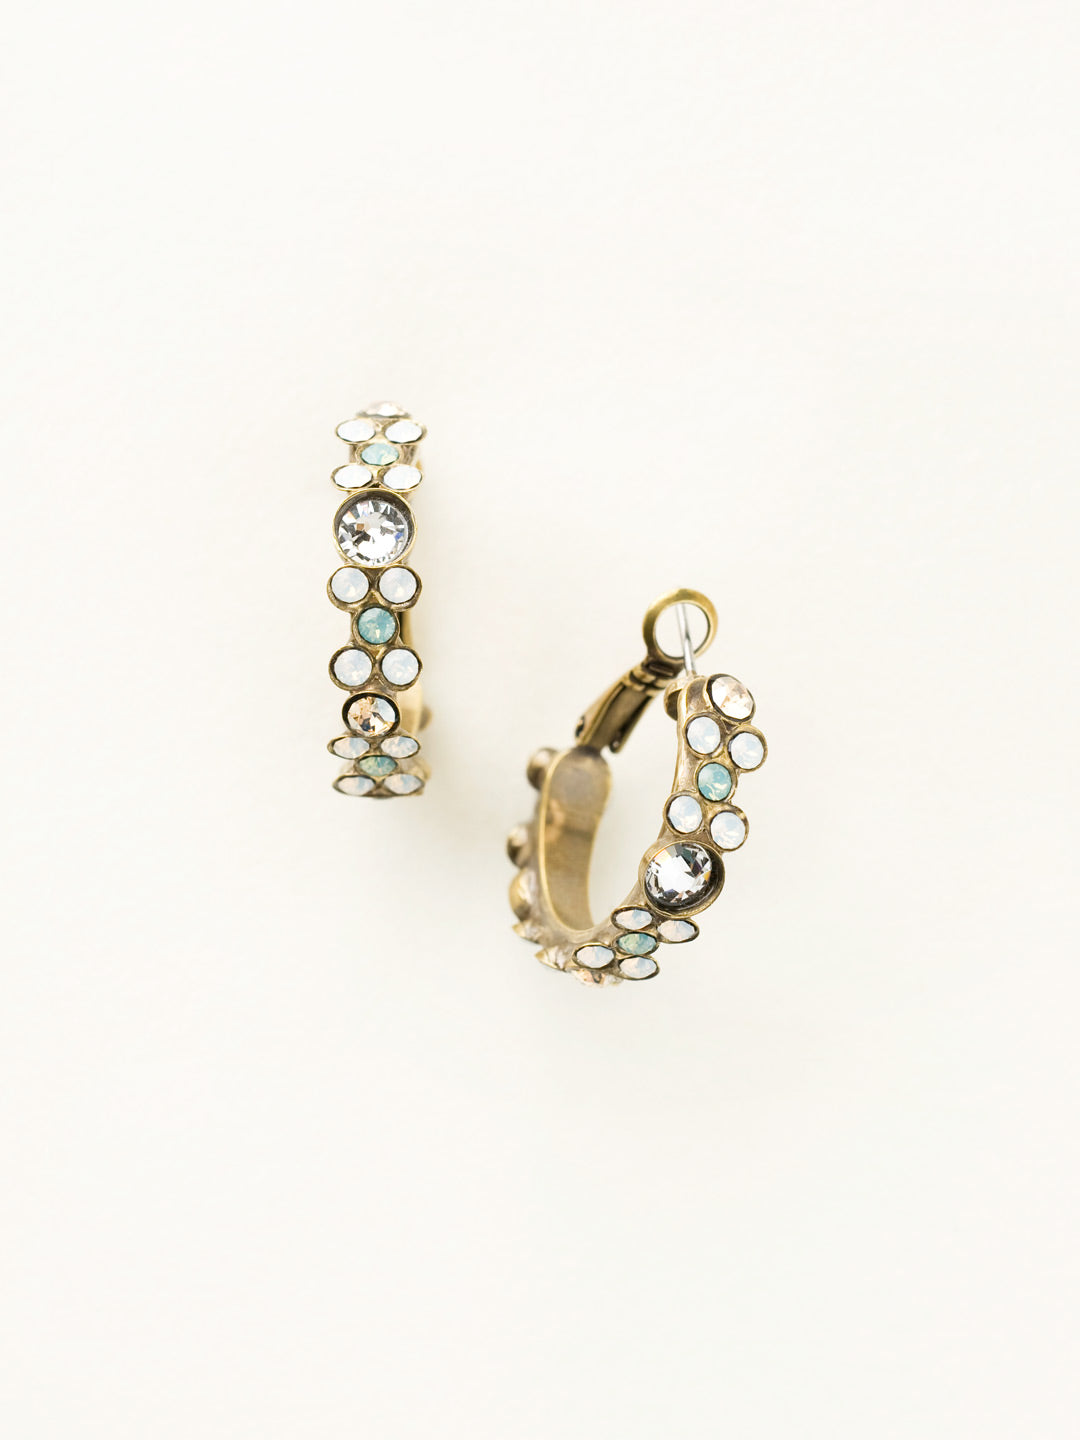 Floral Hoop Earrings - EBP15AGRIV - <p>Intricate design, infused with gorgeous shine. A motif of floral clusters is featured here on a small, delicate hoop with a hinged post backing. From Sorrelli's Riverstone collection in our Antique Gold-tone finish.</p>